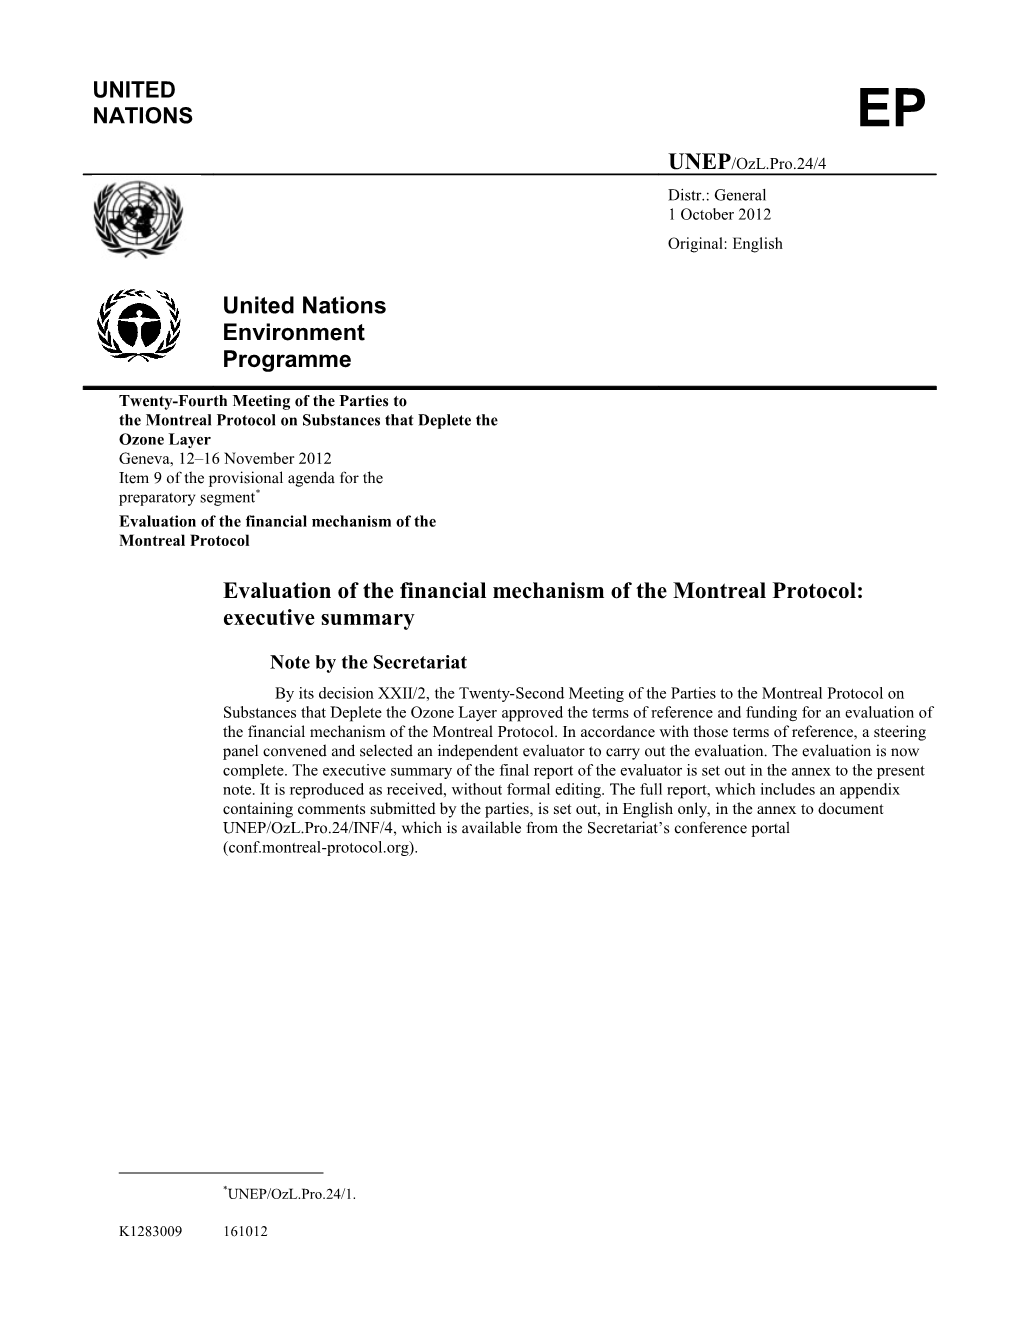 Evaluation of the Financial Mechanism of the Montreal Protocol: Executive Summary